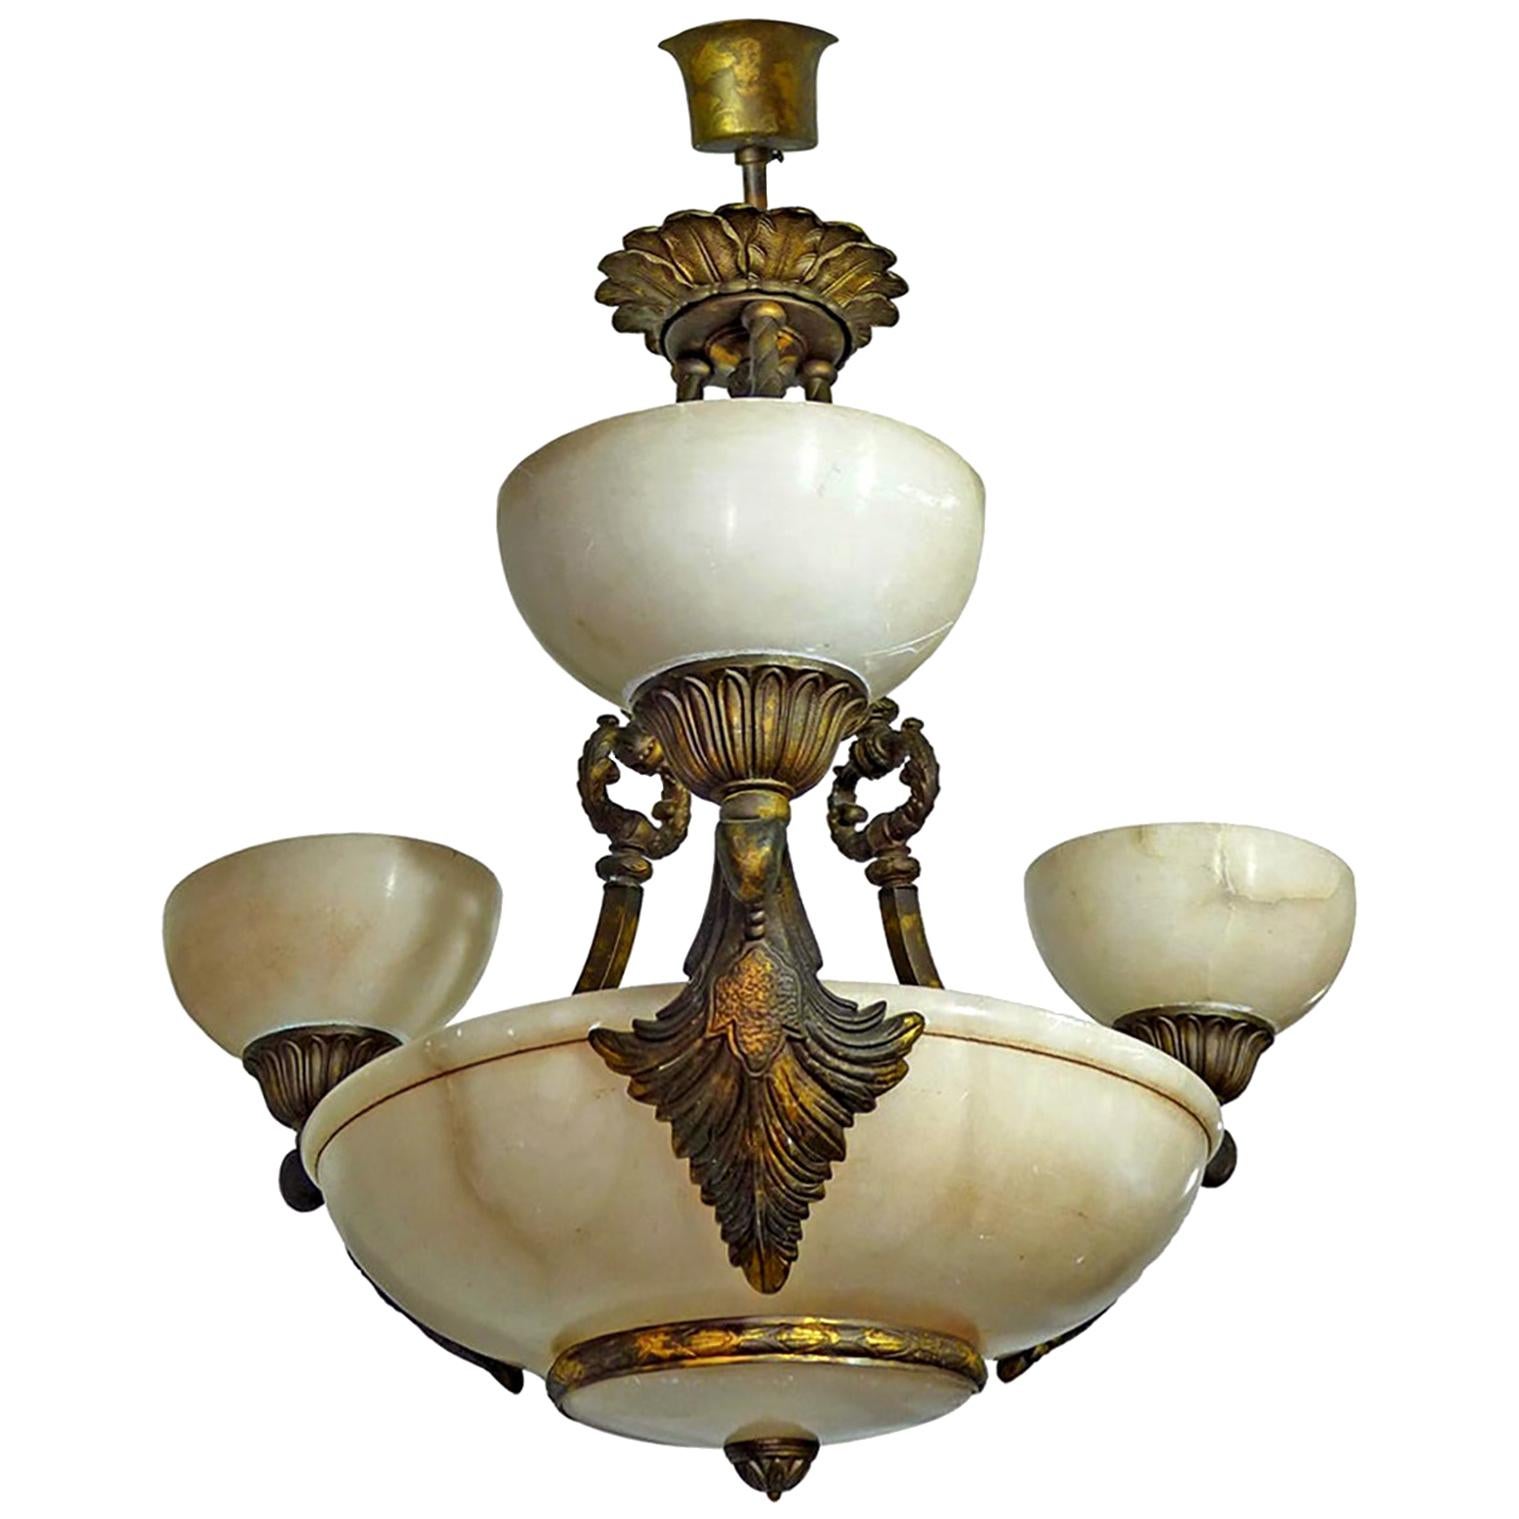 Midcentury French Art Deco and Neoclassical White Marble, Gilt Chandelier